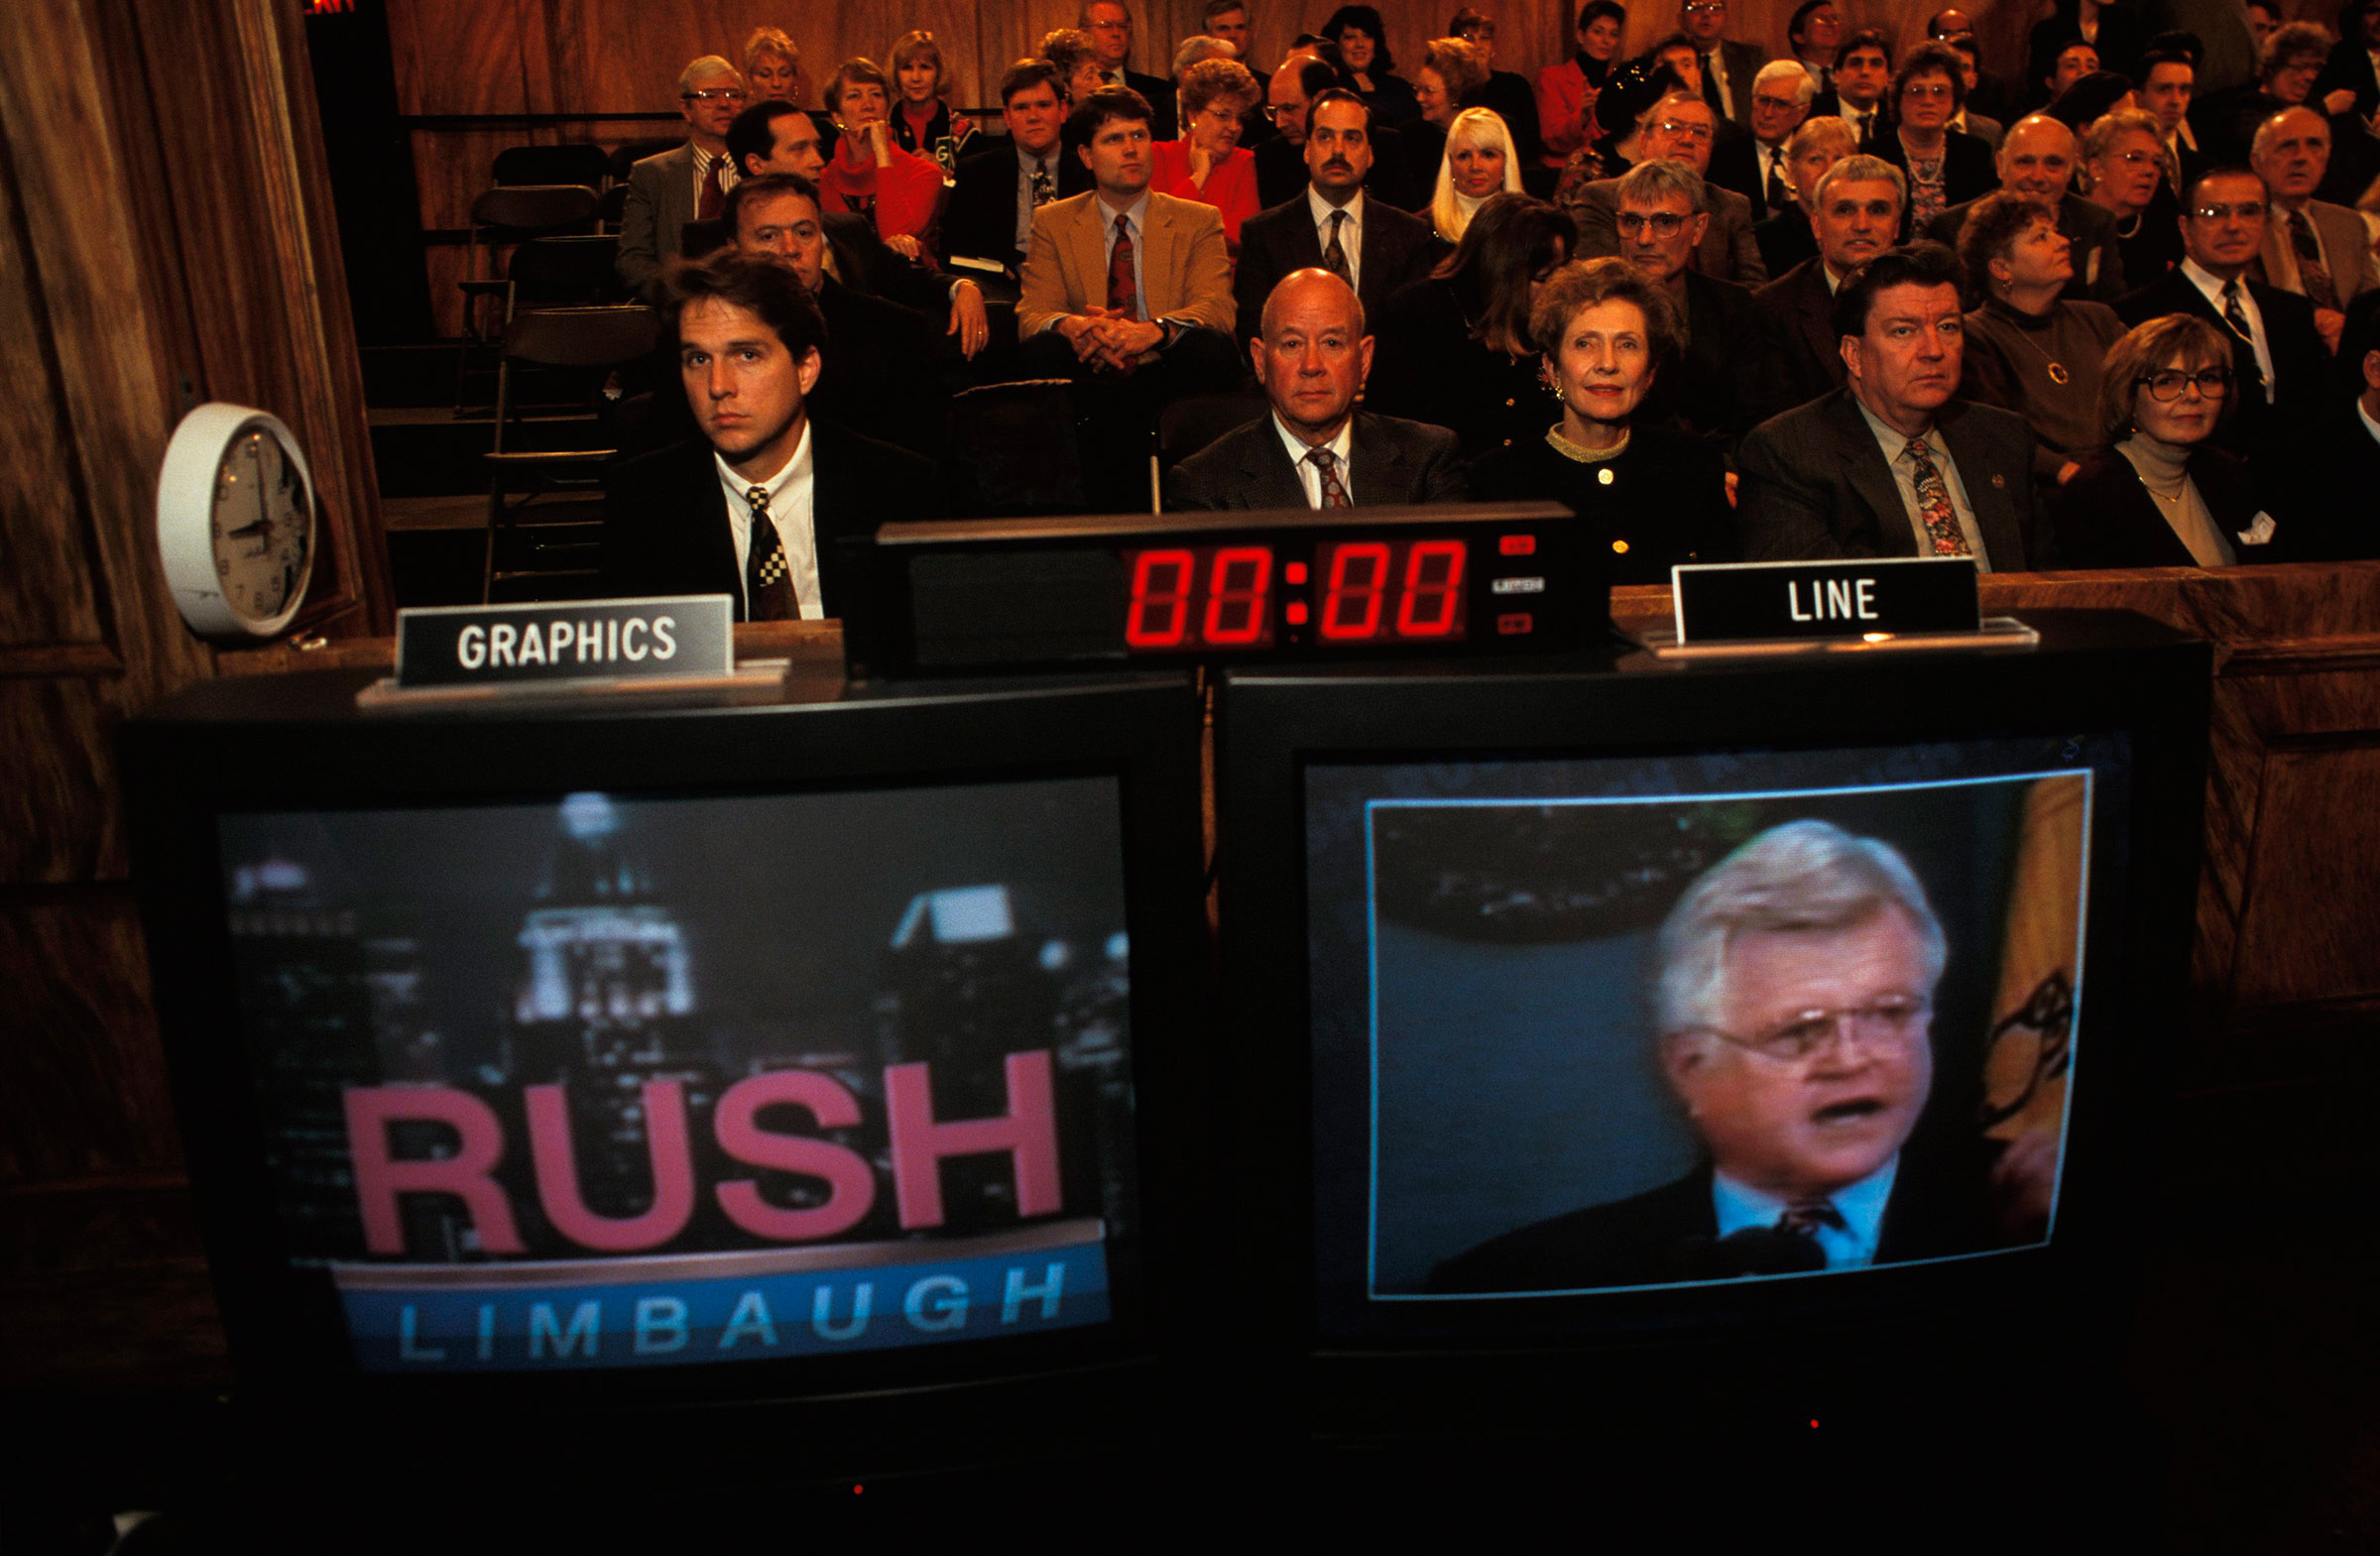 A scene from the set of Rush Limbaugh's show, 1995.